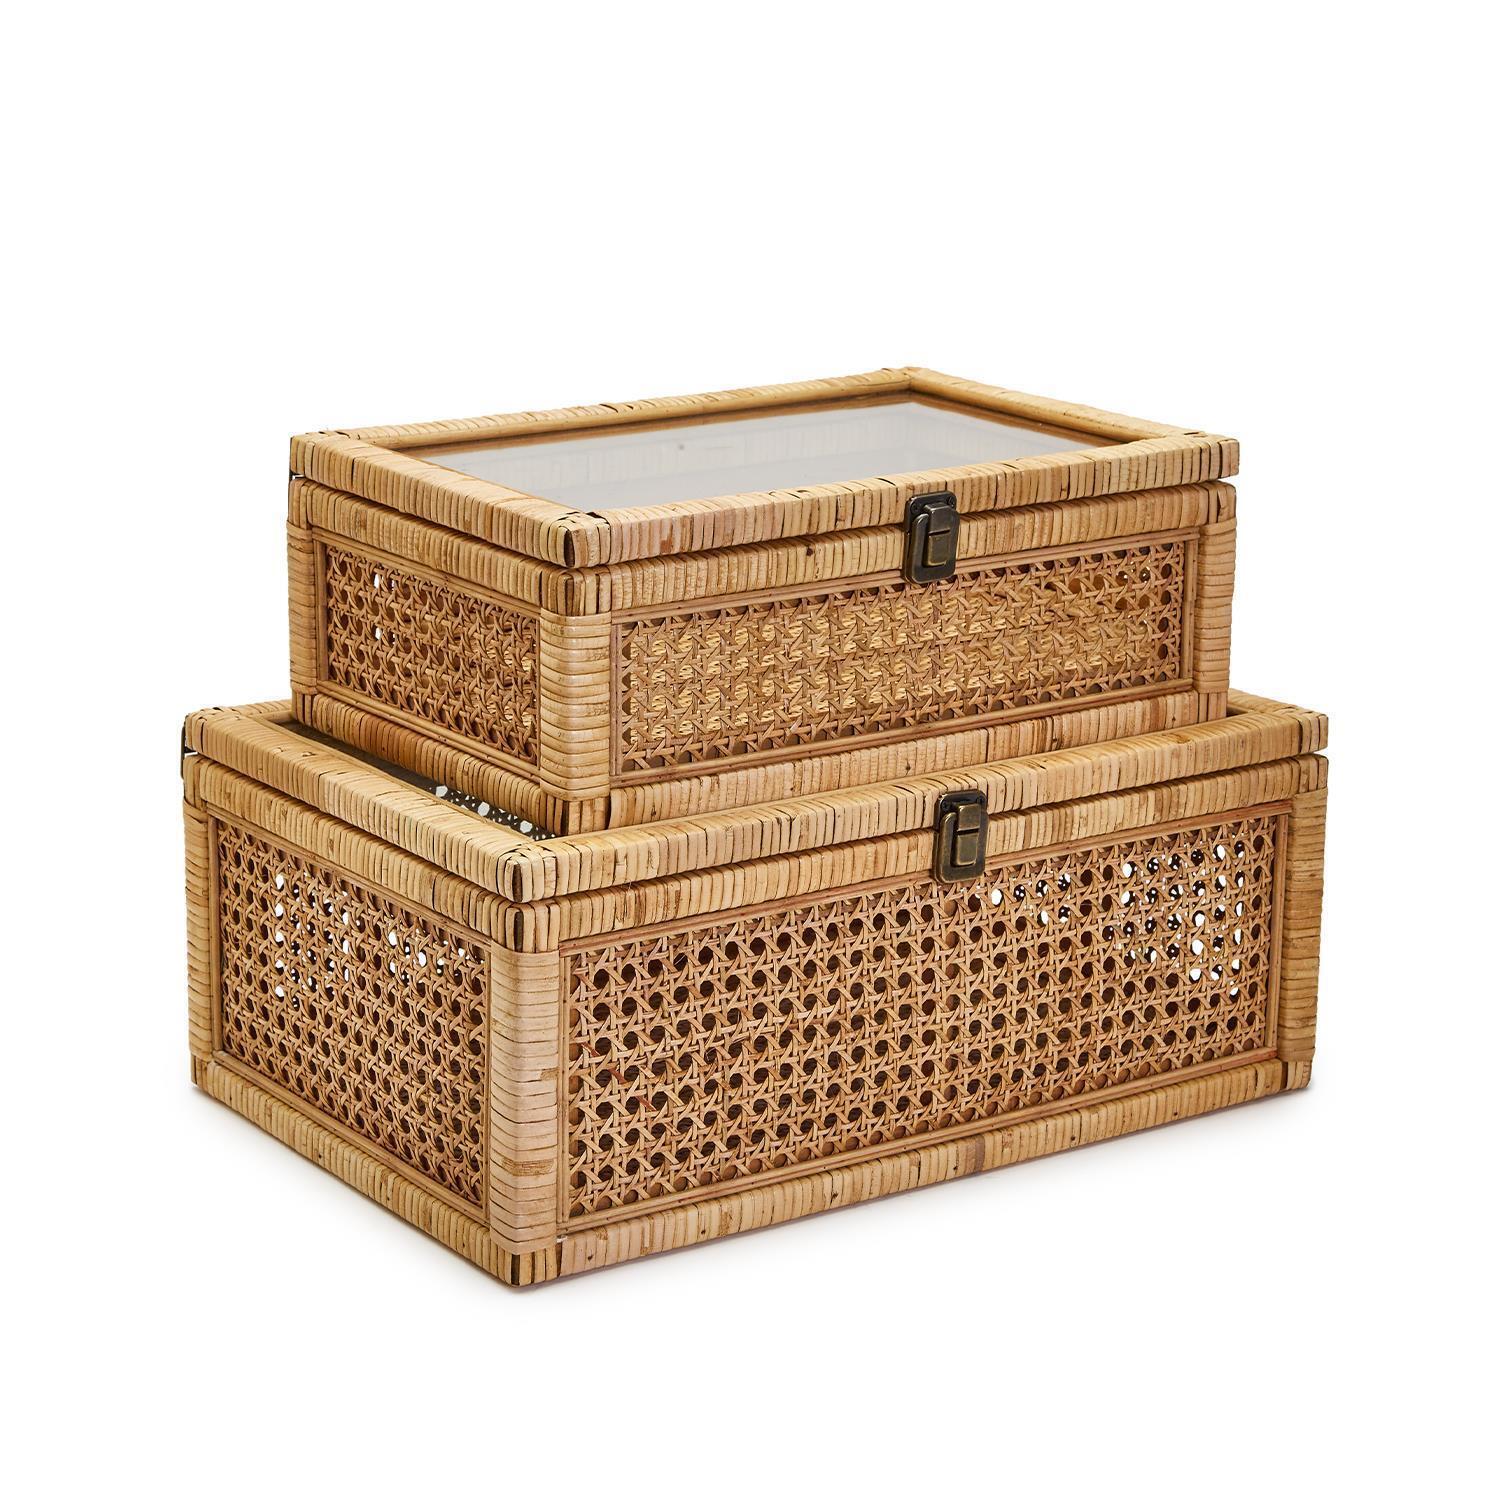 Two's Company Set of 2 Rattan Decorative Storage Boxes Includes 2 Sizes.